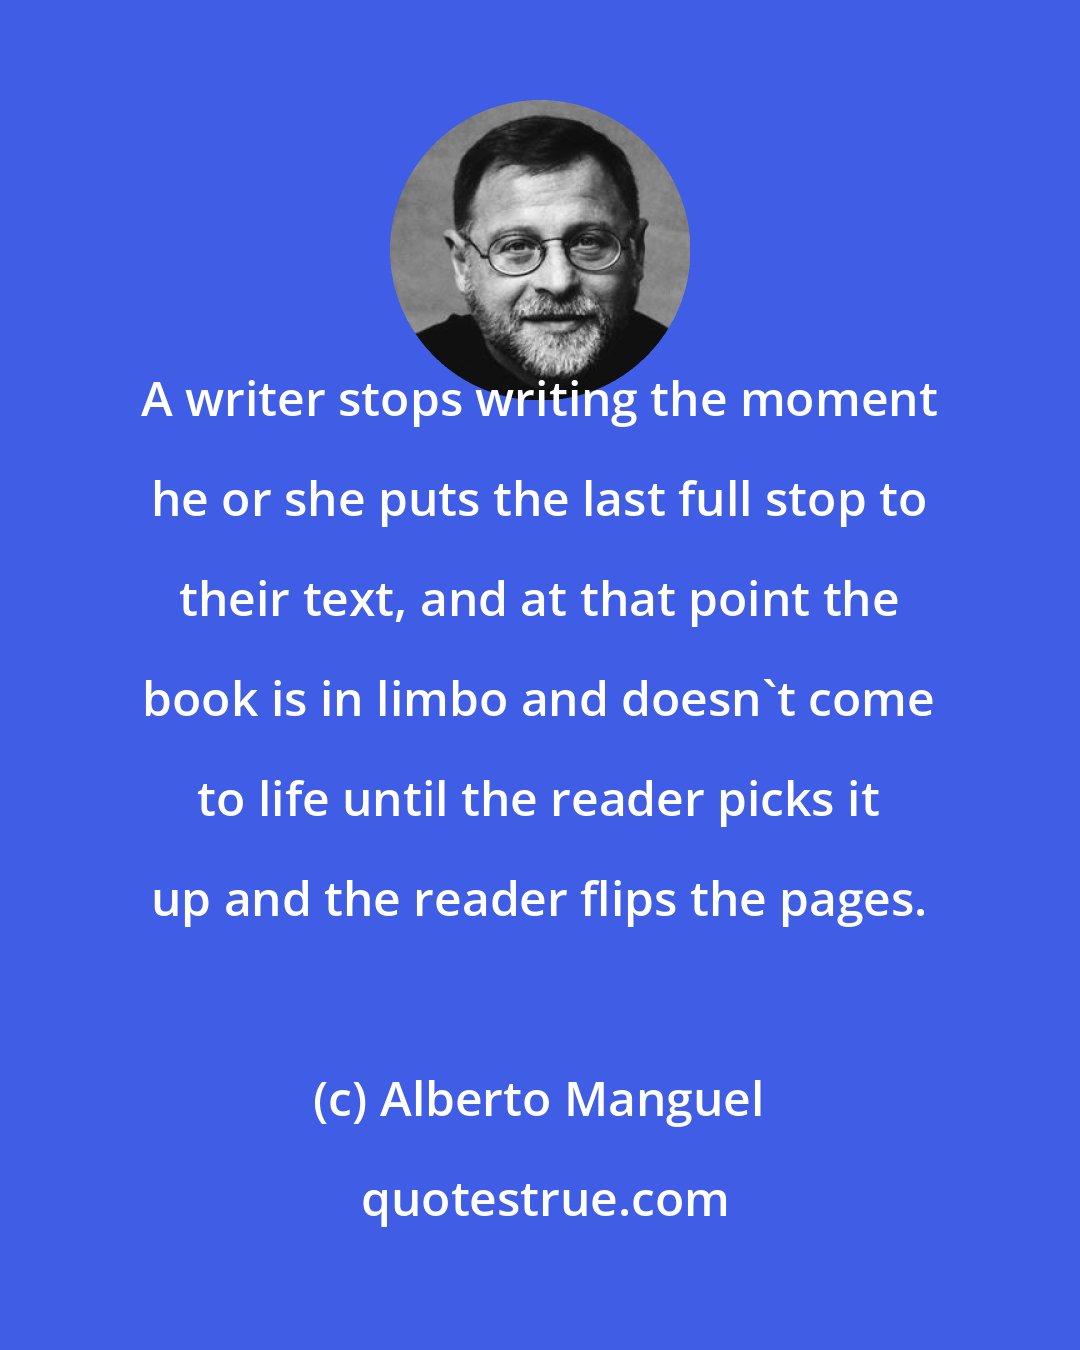 Alberto Manguel: A writer stops writing the moment he or she puts the last full stop to their text, and at that point the book is in limbo and doesn't come to life until the reader picks it up and the reader flips the pages.